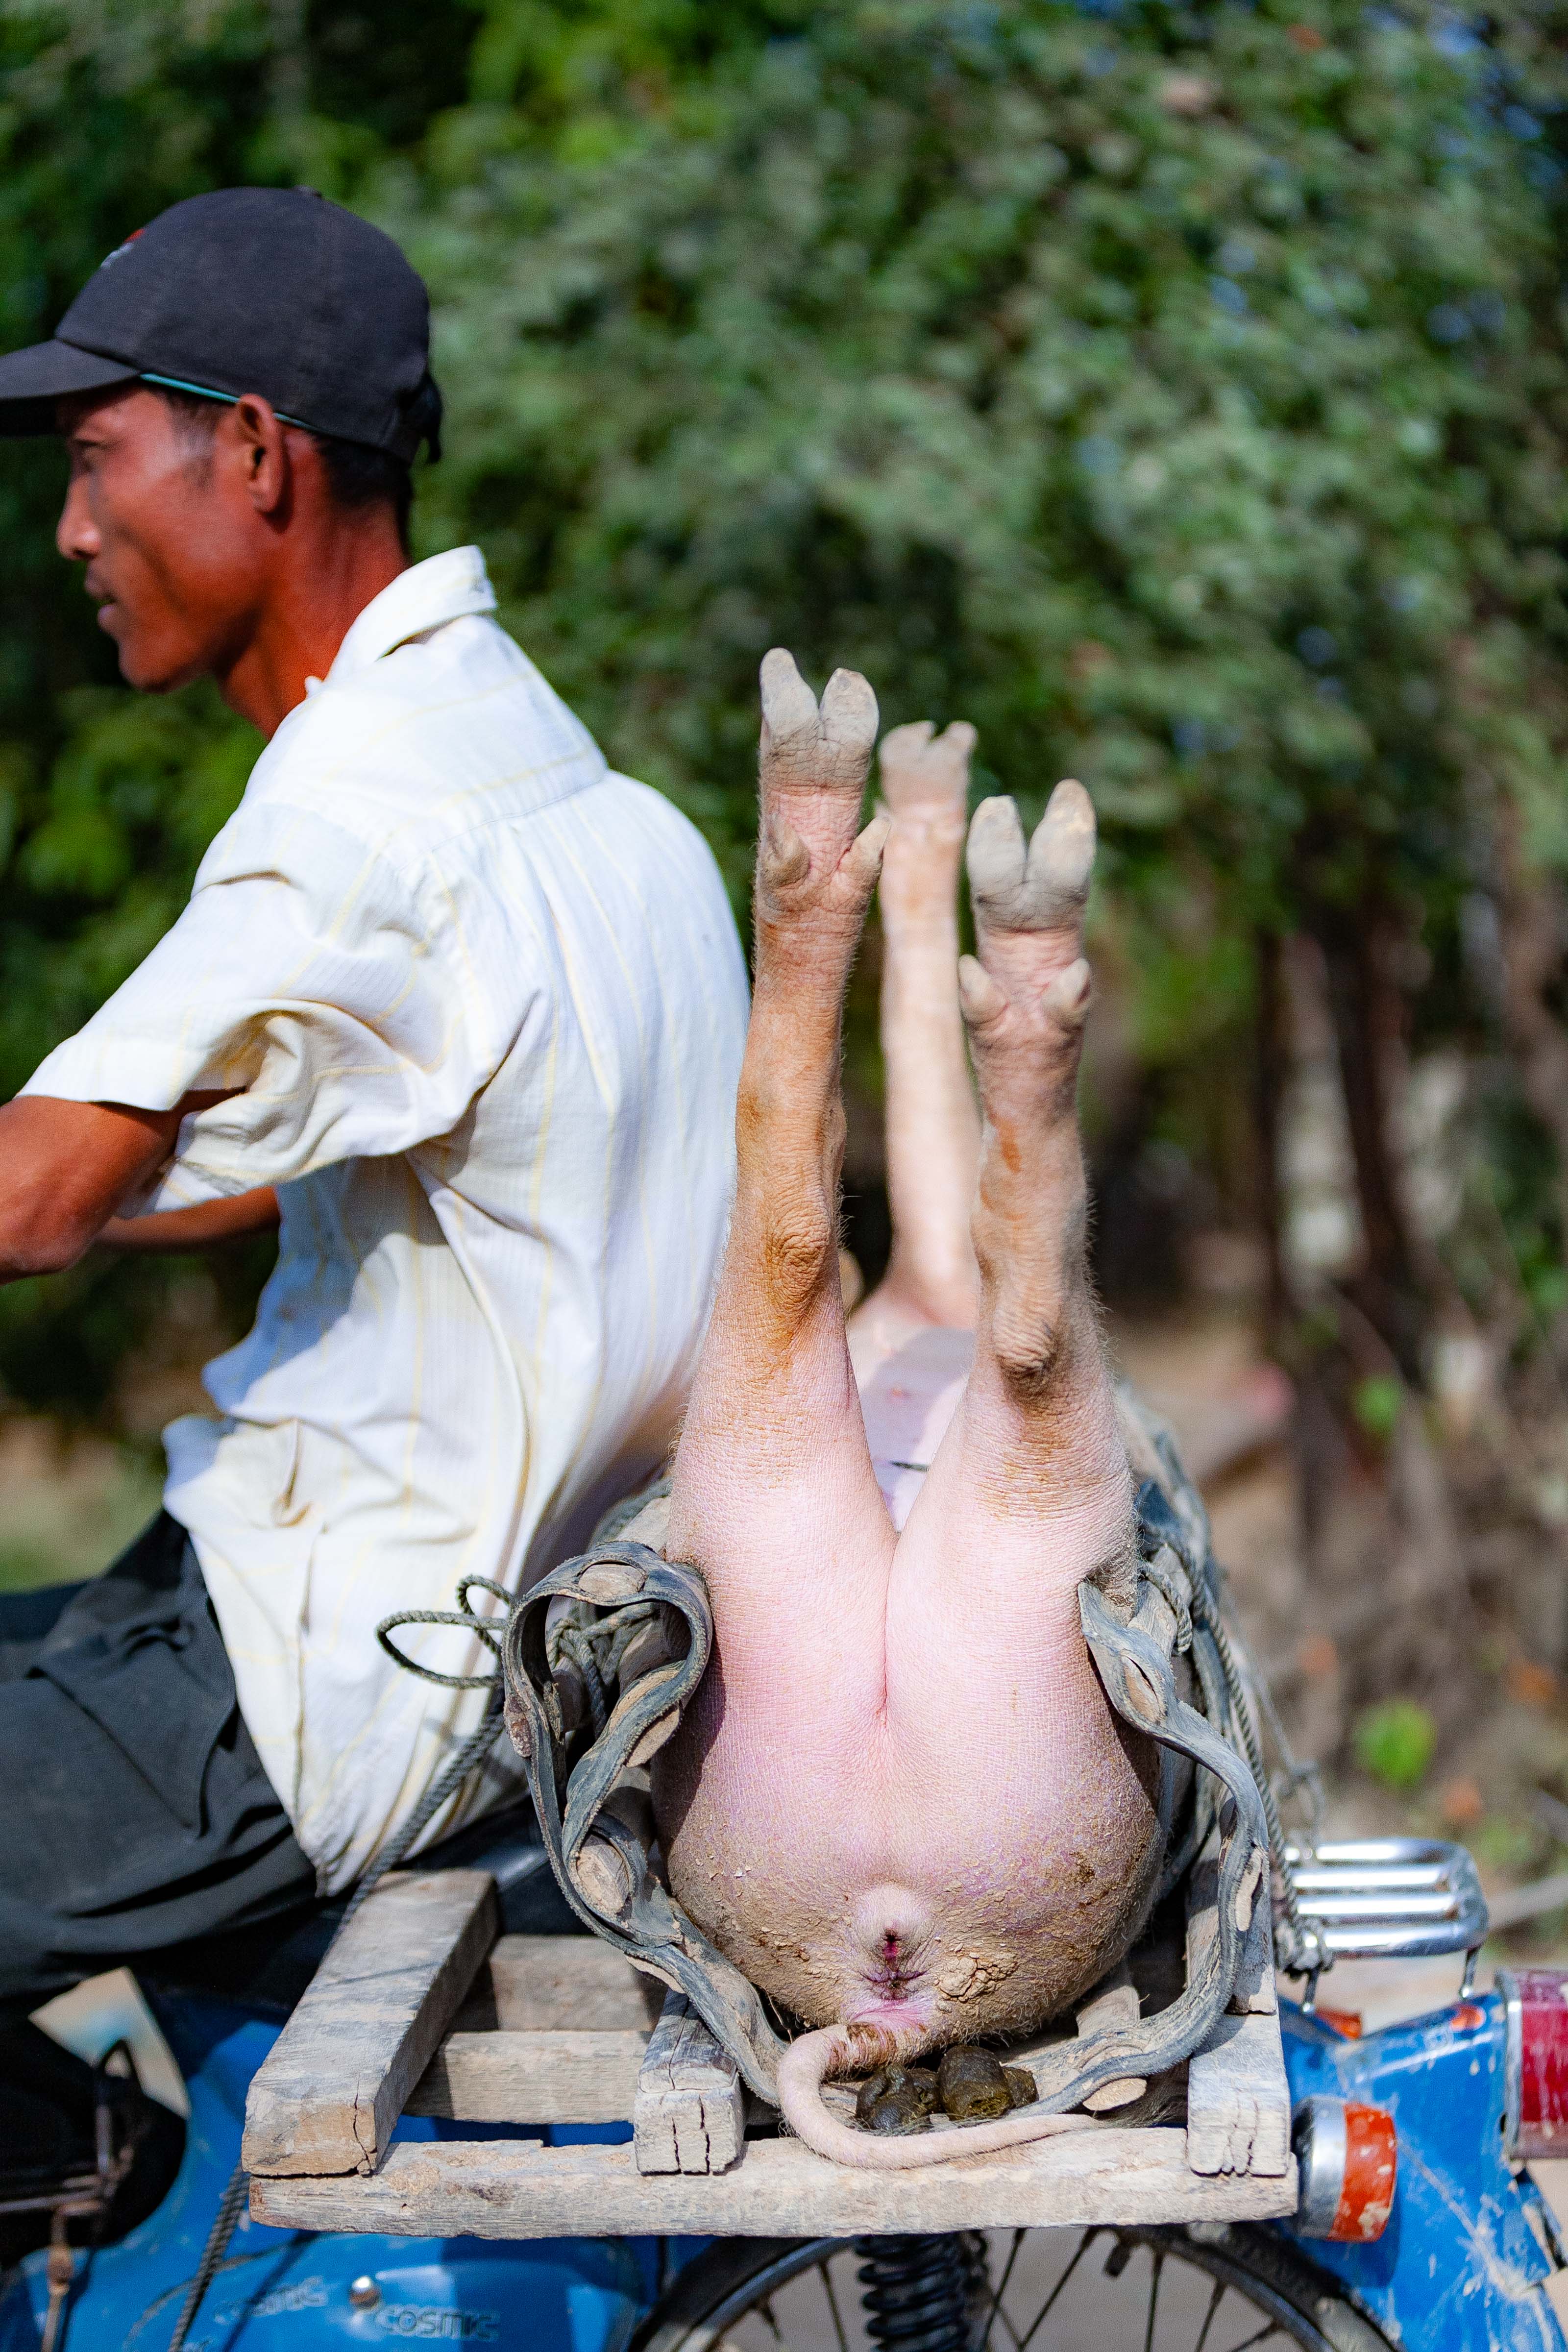 Cambodia, Prey Veaeng Prov, Pig And Ass, 2010, IMG 5266